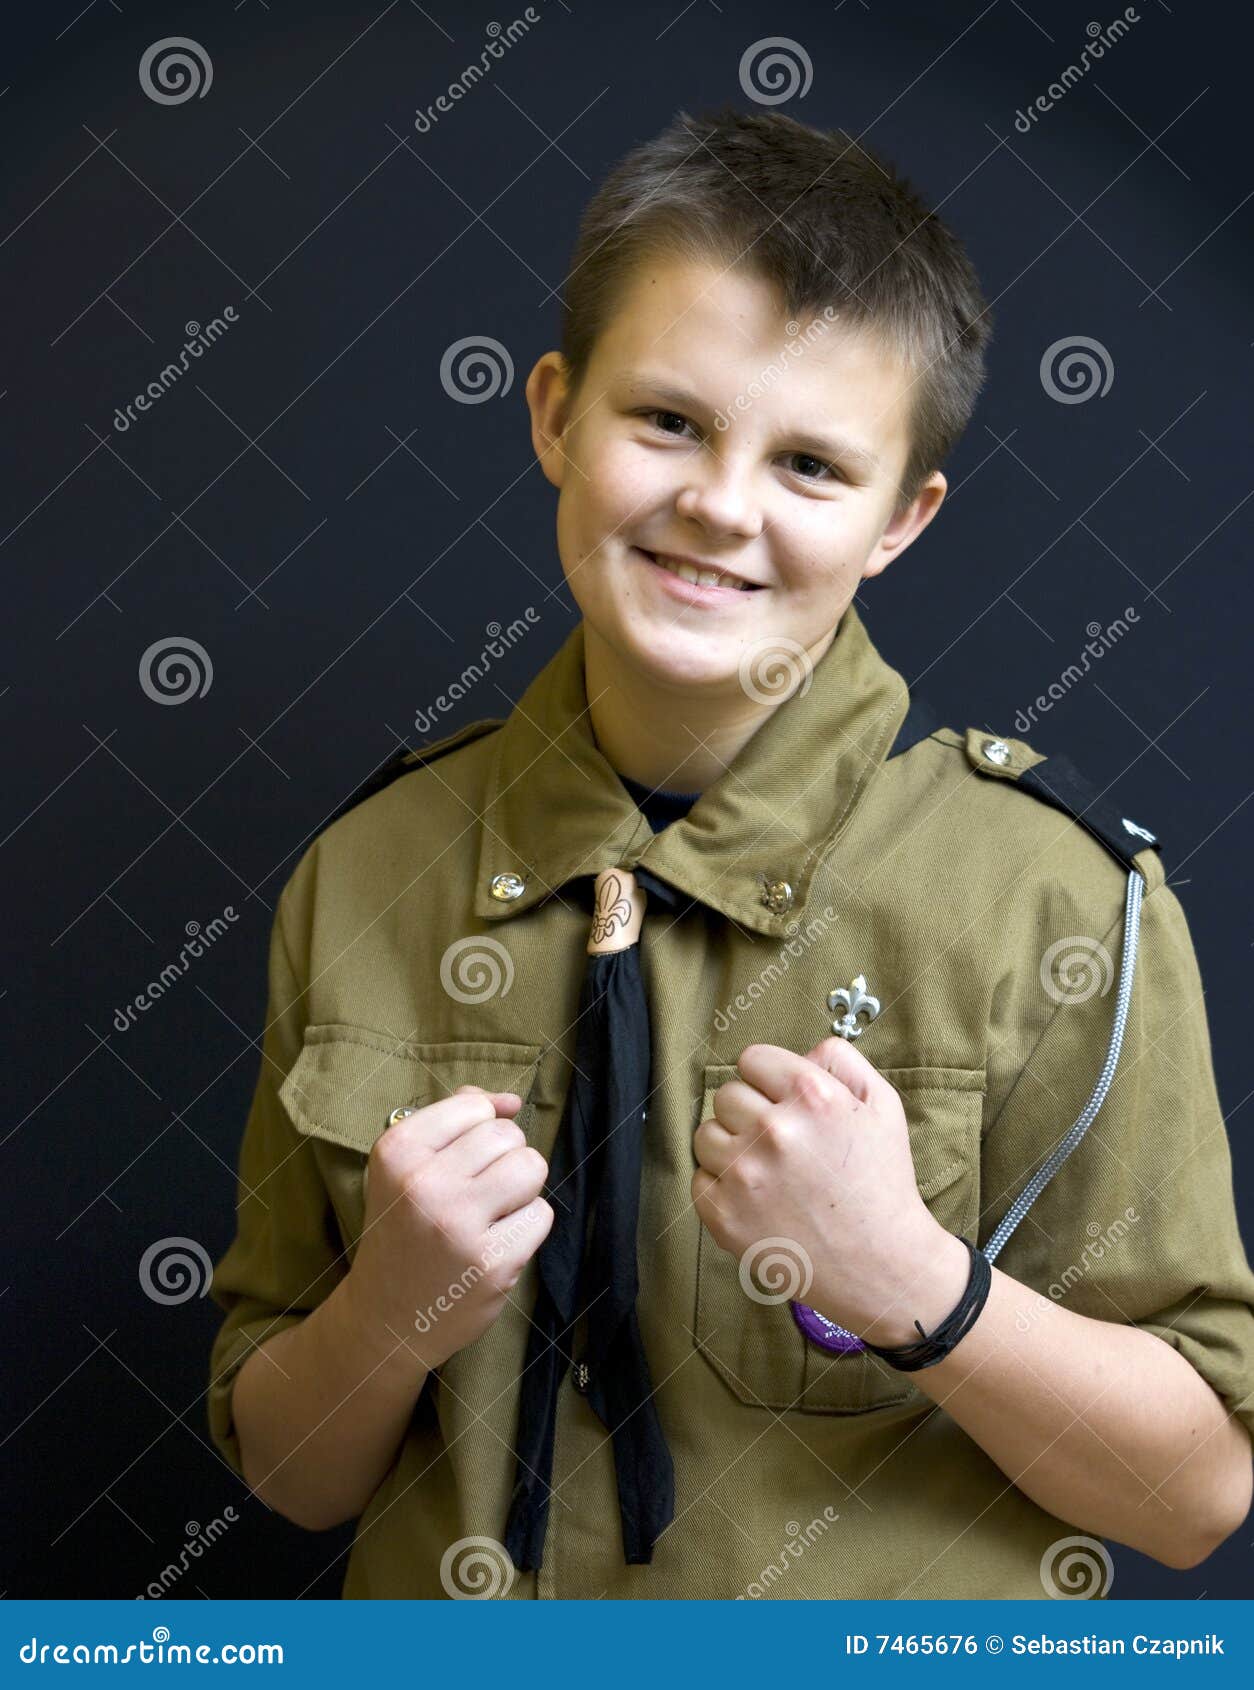 boy scout fighter